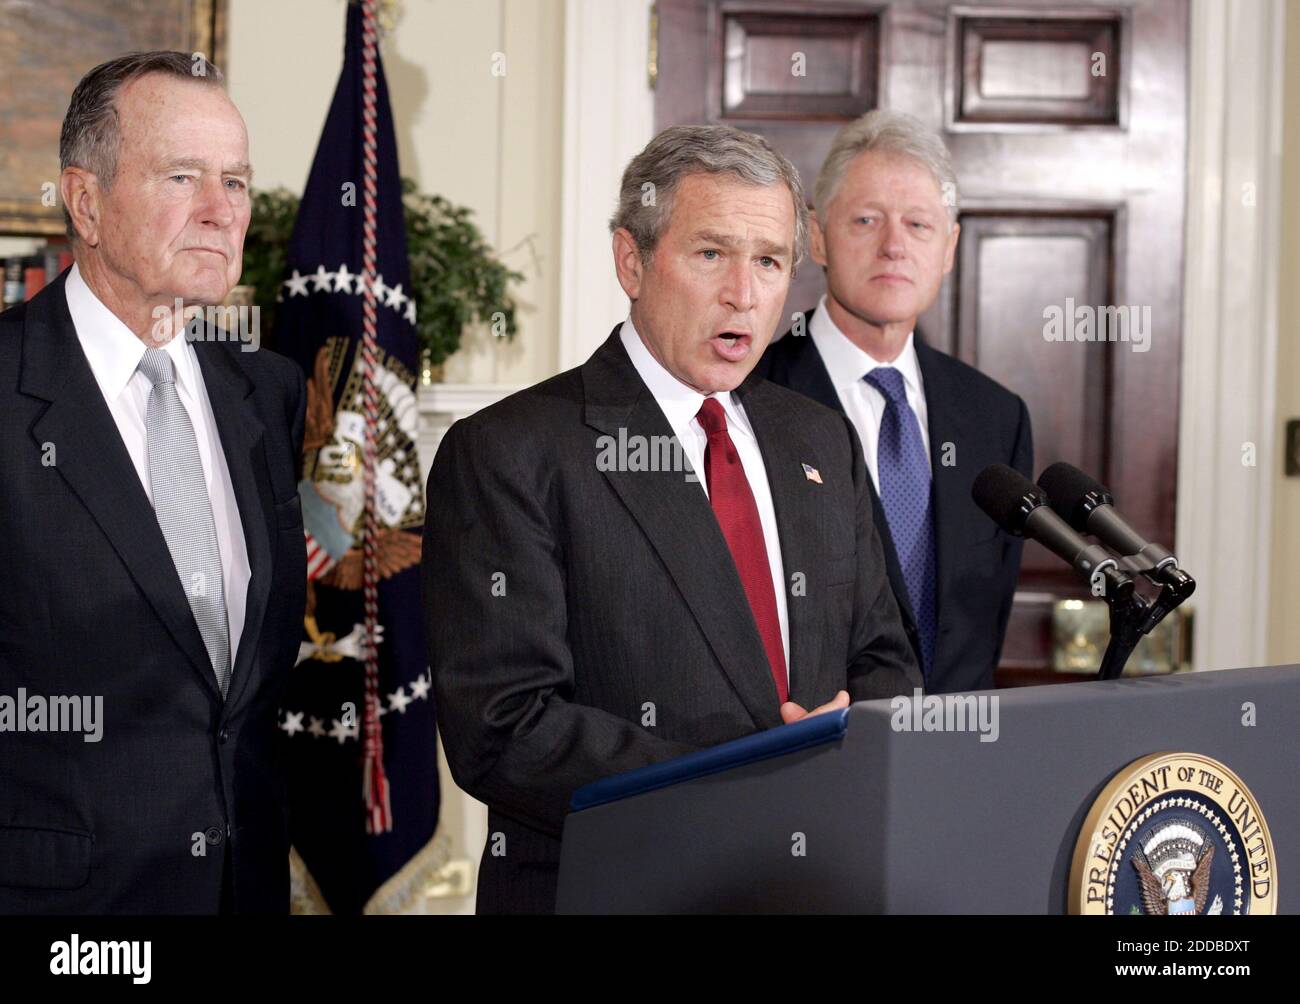 NO FILM, NO VIDEO, NO TV, NO DOCUMENTARY - President George W. Bush , flanked by former Presidents Bill Clinton (R) and George H. Bush (L), makes an appeal to Americans for donations to aid victims of last week's tsunami, while at the White House January 3, 2005. Bush brought together former presidents George Bush and Clinton on Monday to launch an appeal for Americans to make a donation to help victims of the South Asia quake and tsunamis. The president's father and Clinton will lead a bipartisan effort to seek out donations both large and small to provide relief assistance to millions left h Stock Photo